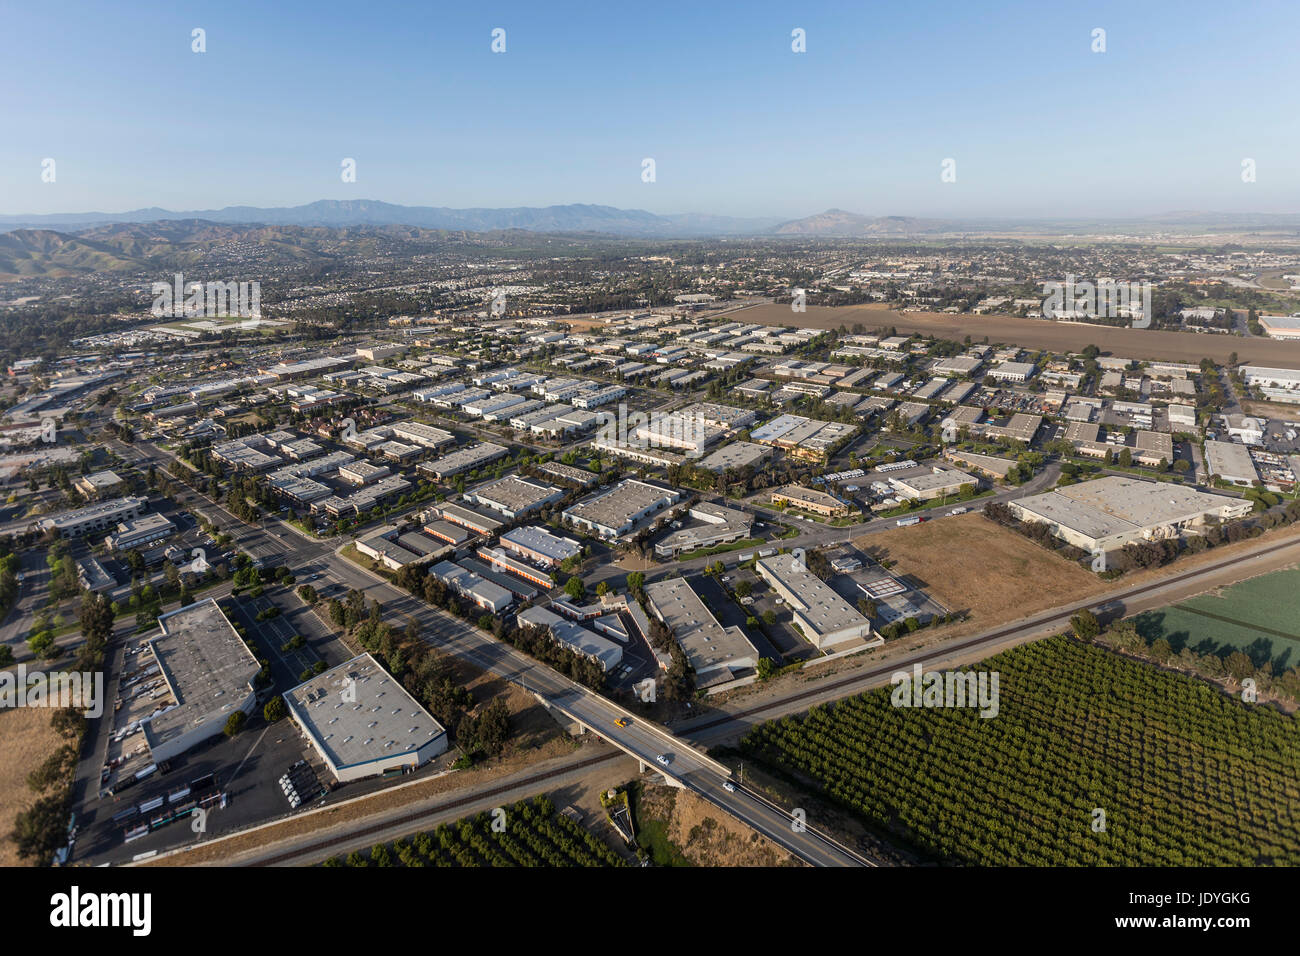 Aerial view of Camarillo industrial park and agricultural fields in Ventura County, California. Stock Photo